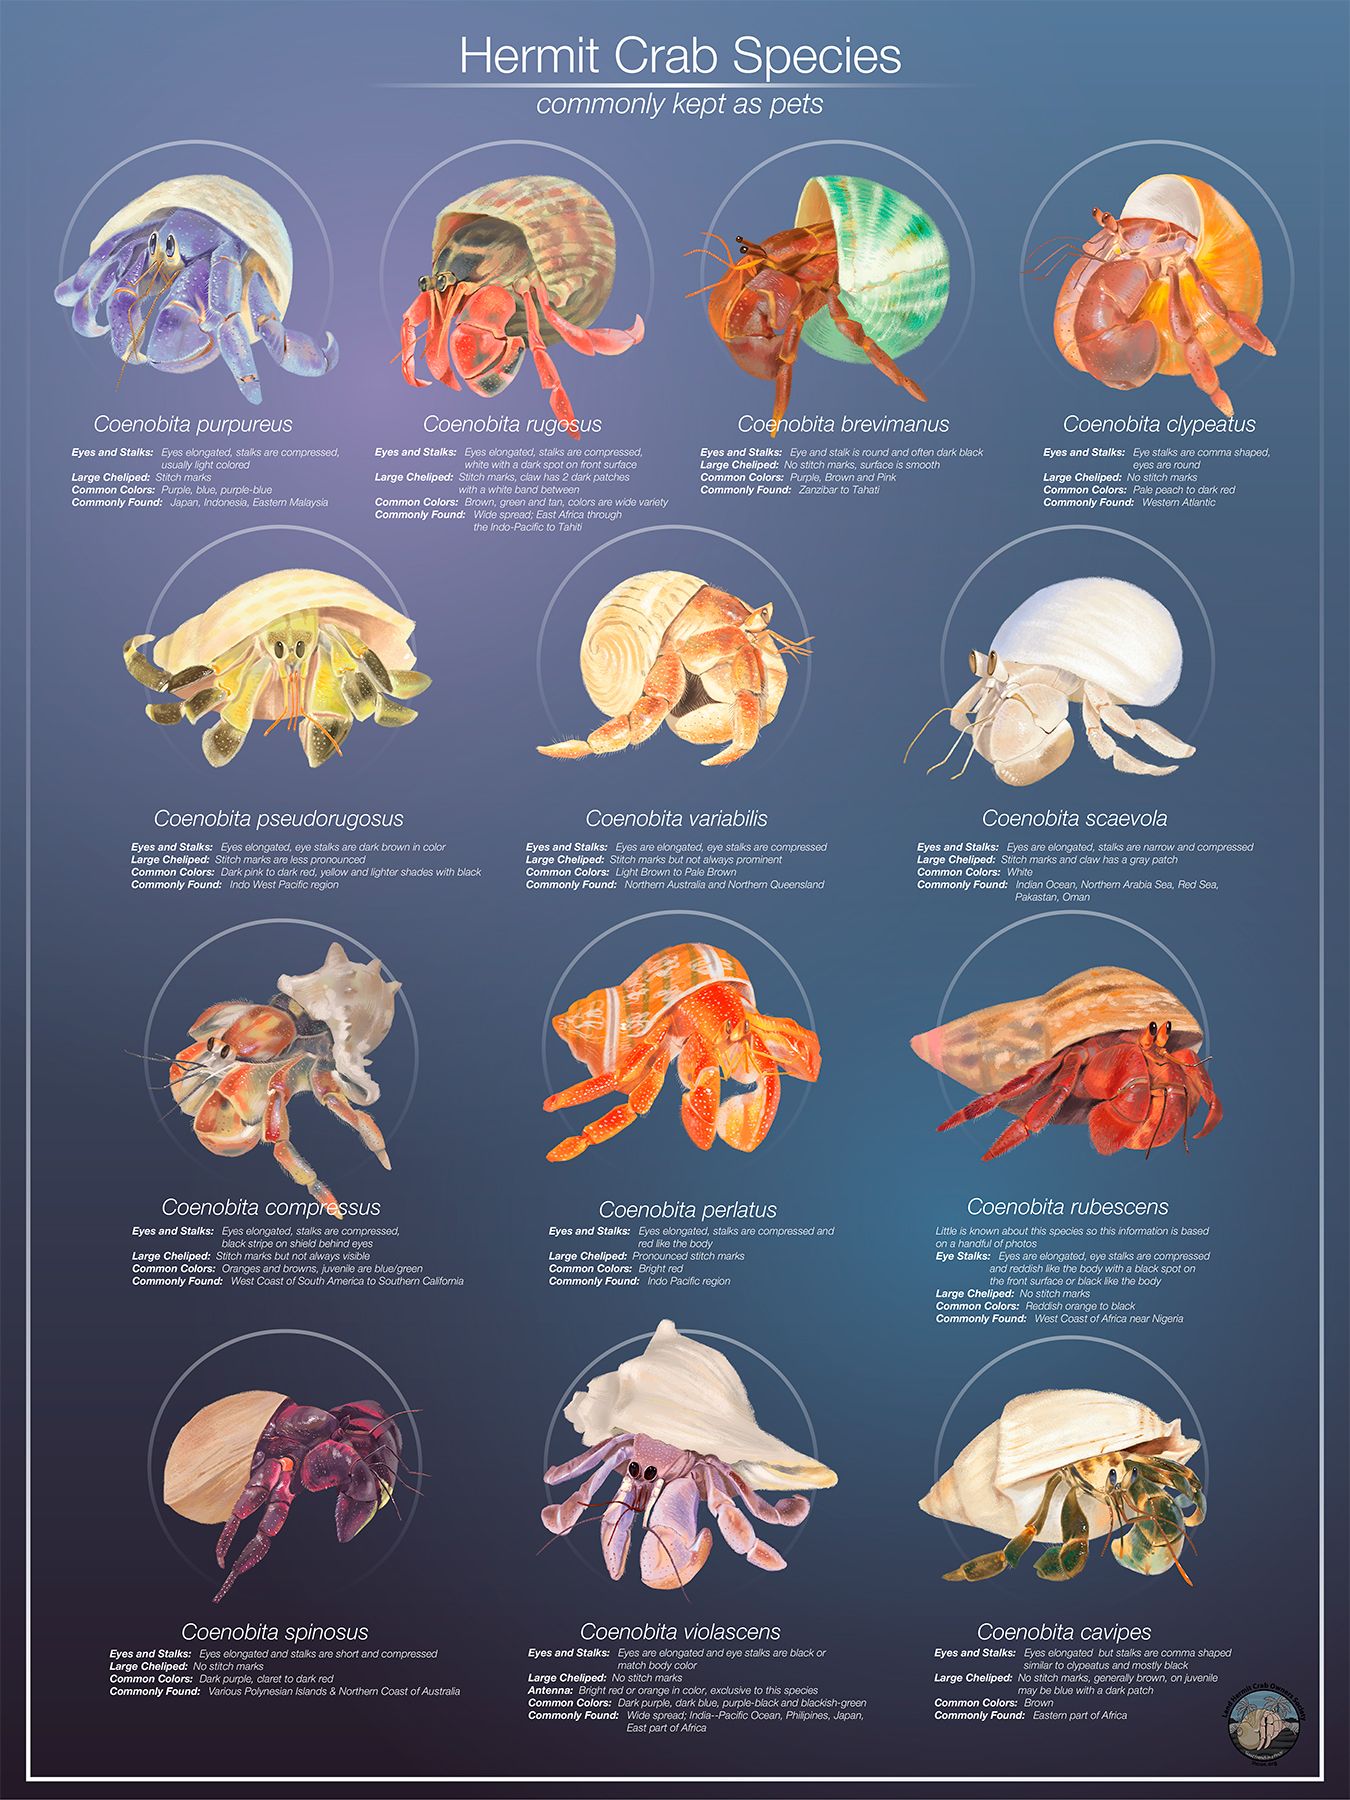 Are there different breeds of hermit crabs?